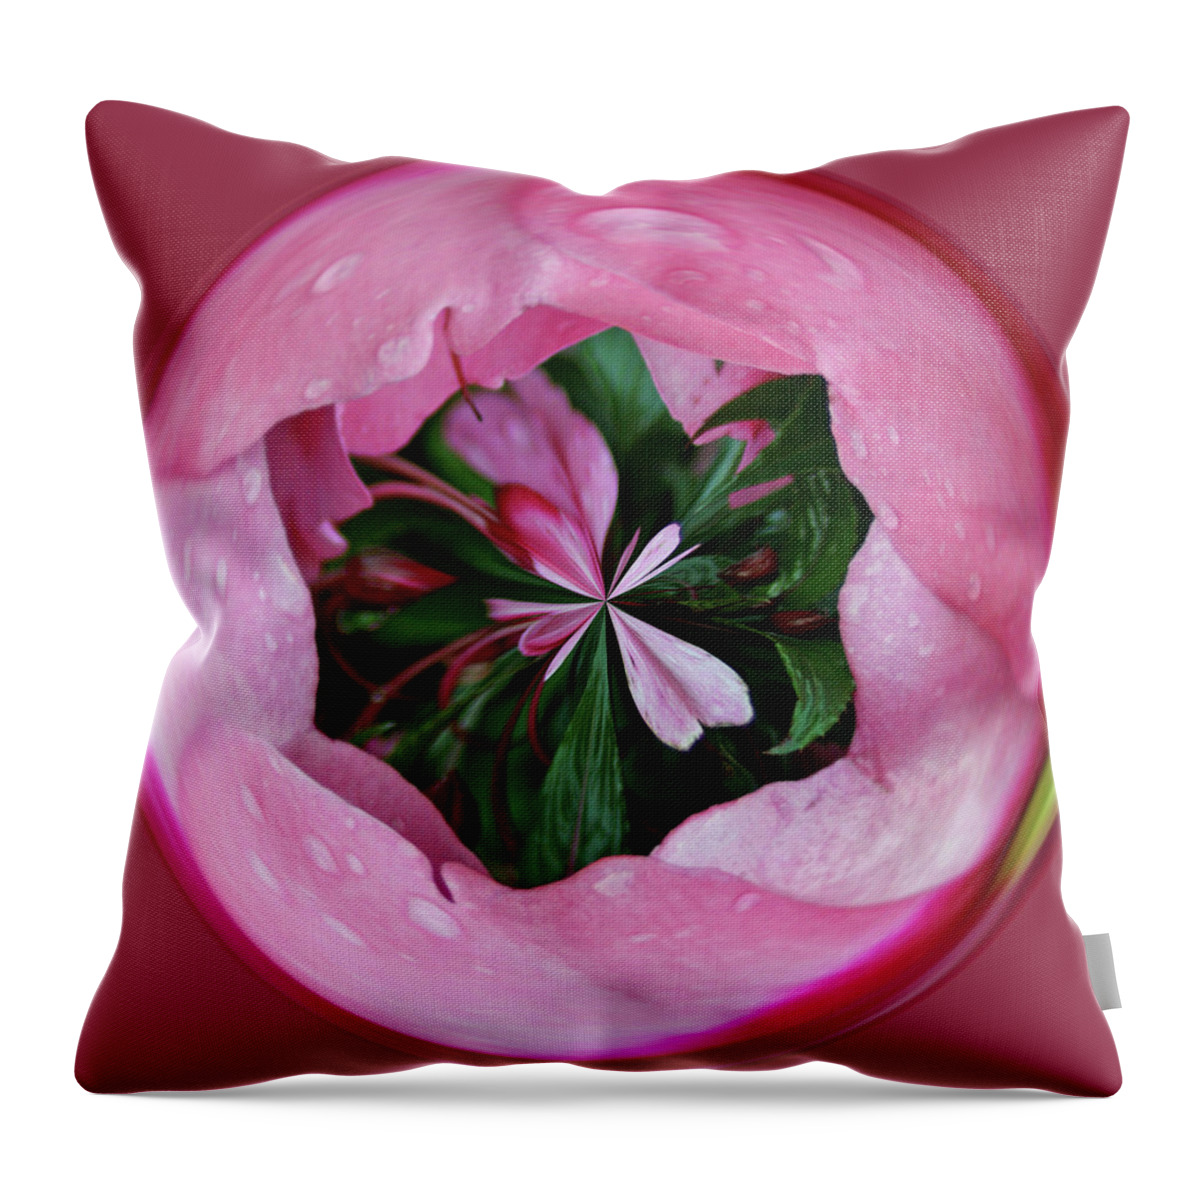 Pink Throw Pillow featuring the photograph Pink Orb by Bill Barber